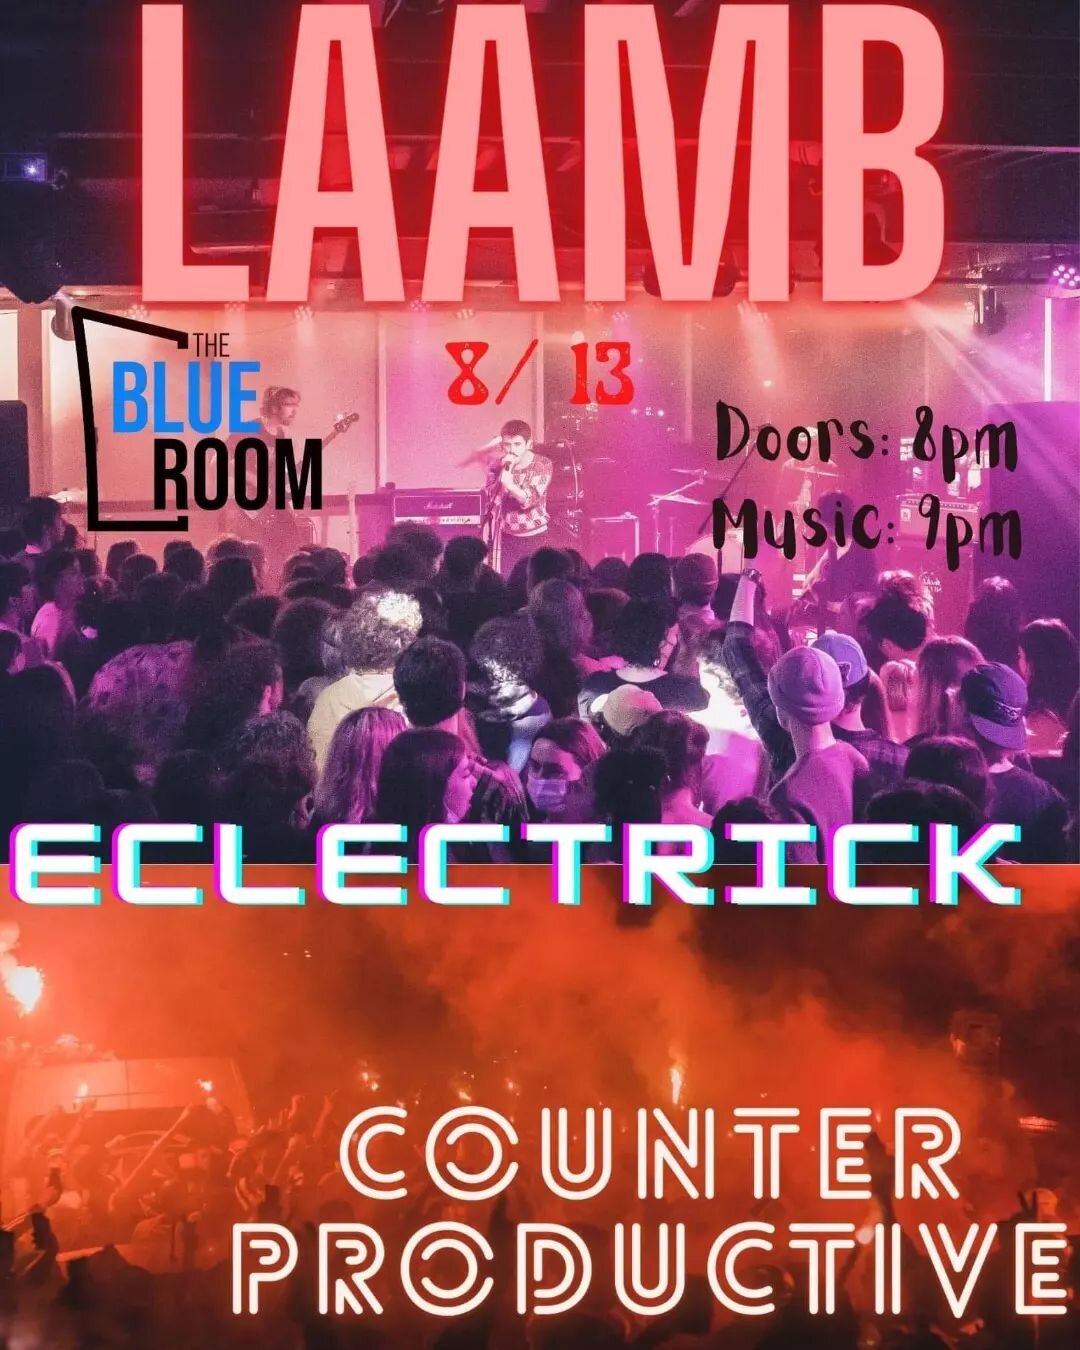 We are so stoked to be playing at @blueroombham alongside @laambtheband and @counterproductiveband next weekend! Super excited to playing in Bellingham again, come on out y'all! 😎

#bellingham #funk #localmusic #theblueroom #counterproductive #laamb